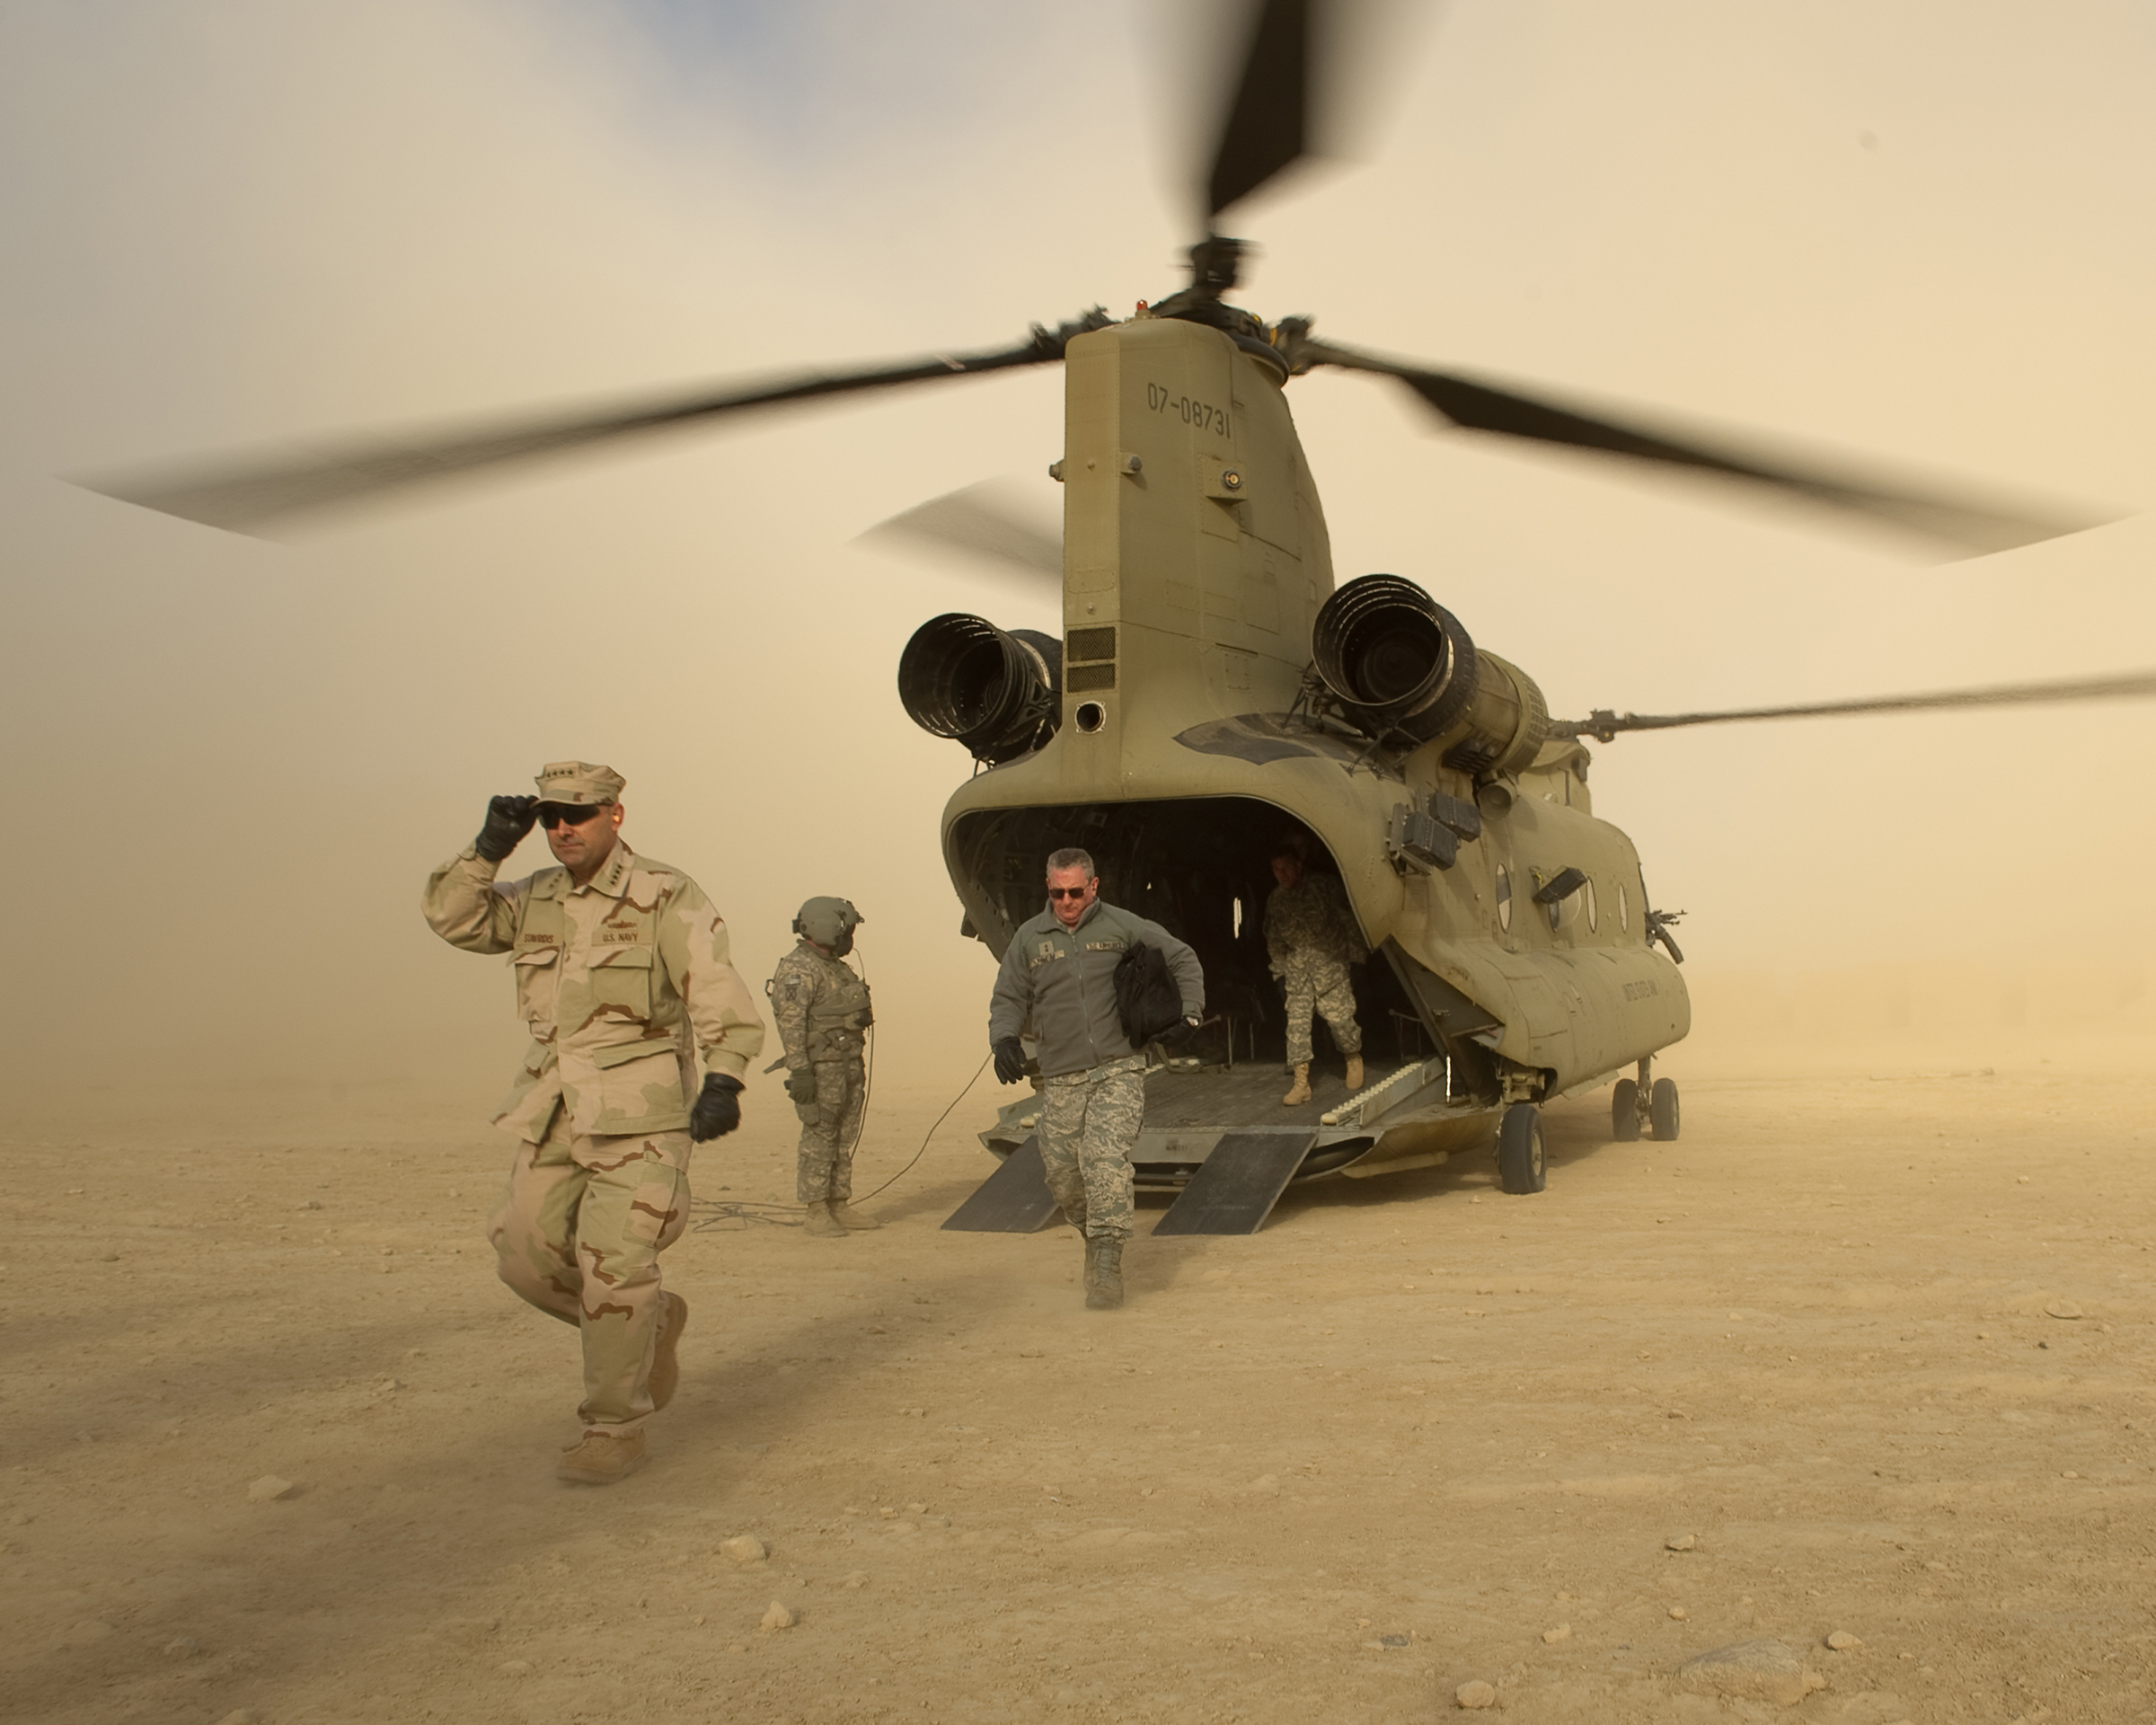 While Supreme Allied Commander of NATO, Admiral Stavridis dismounts a helicopter in Afghanistan outside of Khandahar in 2010. (RNLAF/NATO)